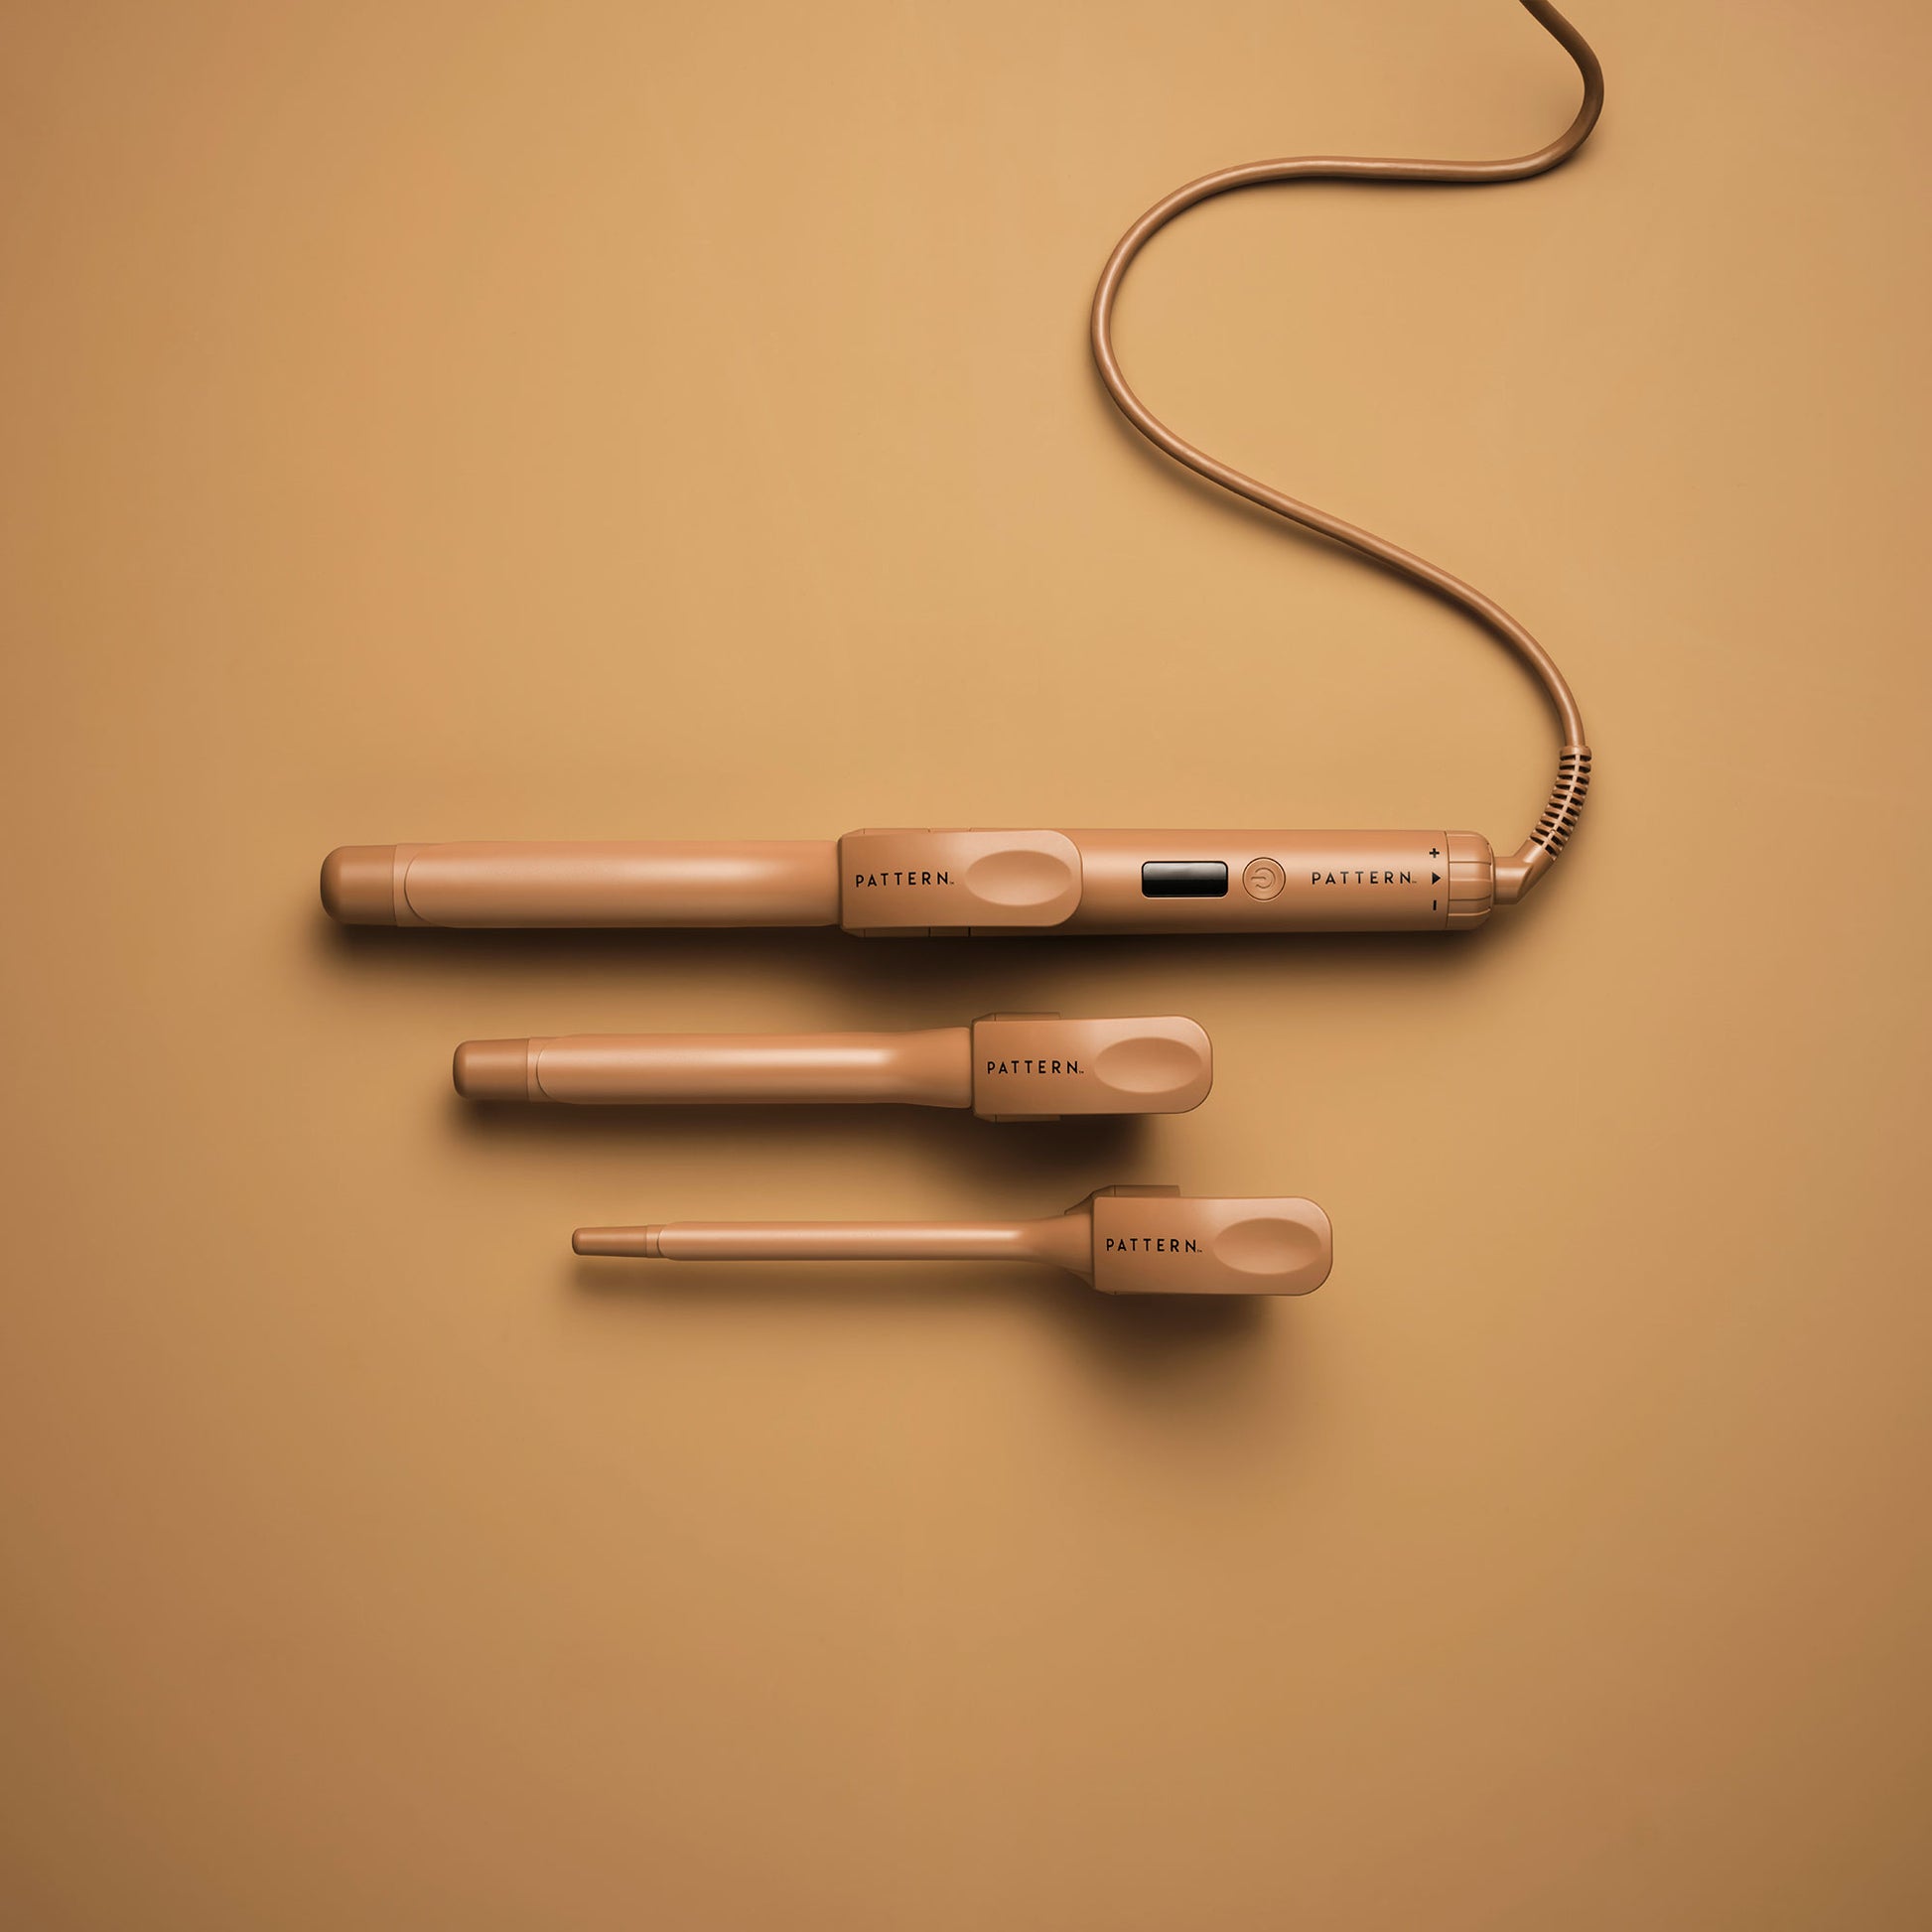 The Interchangeable Curling Iron